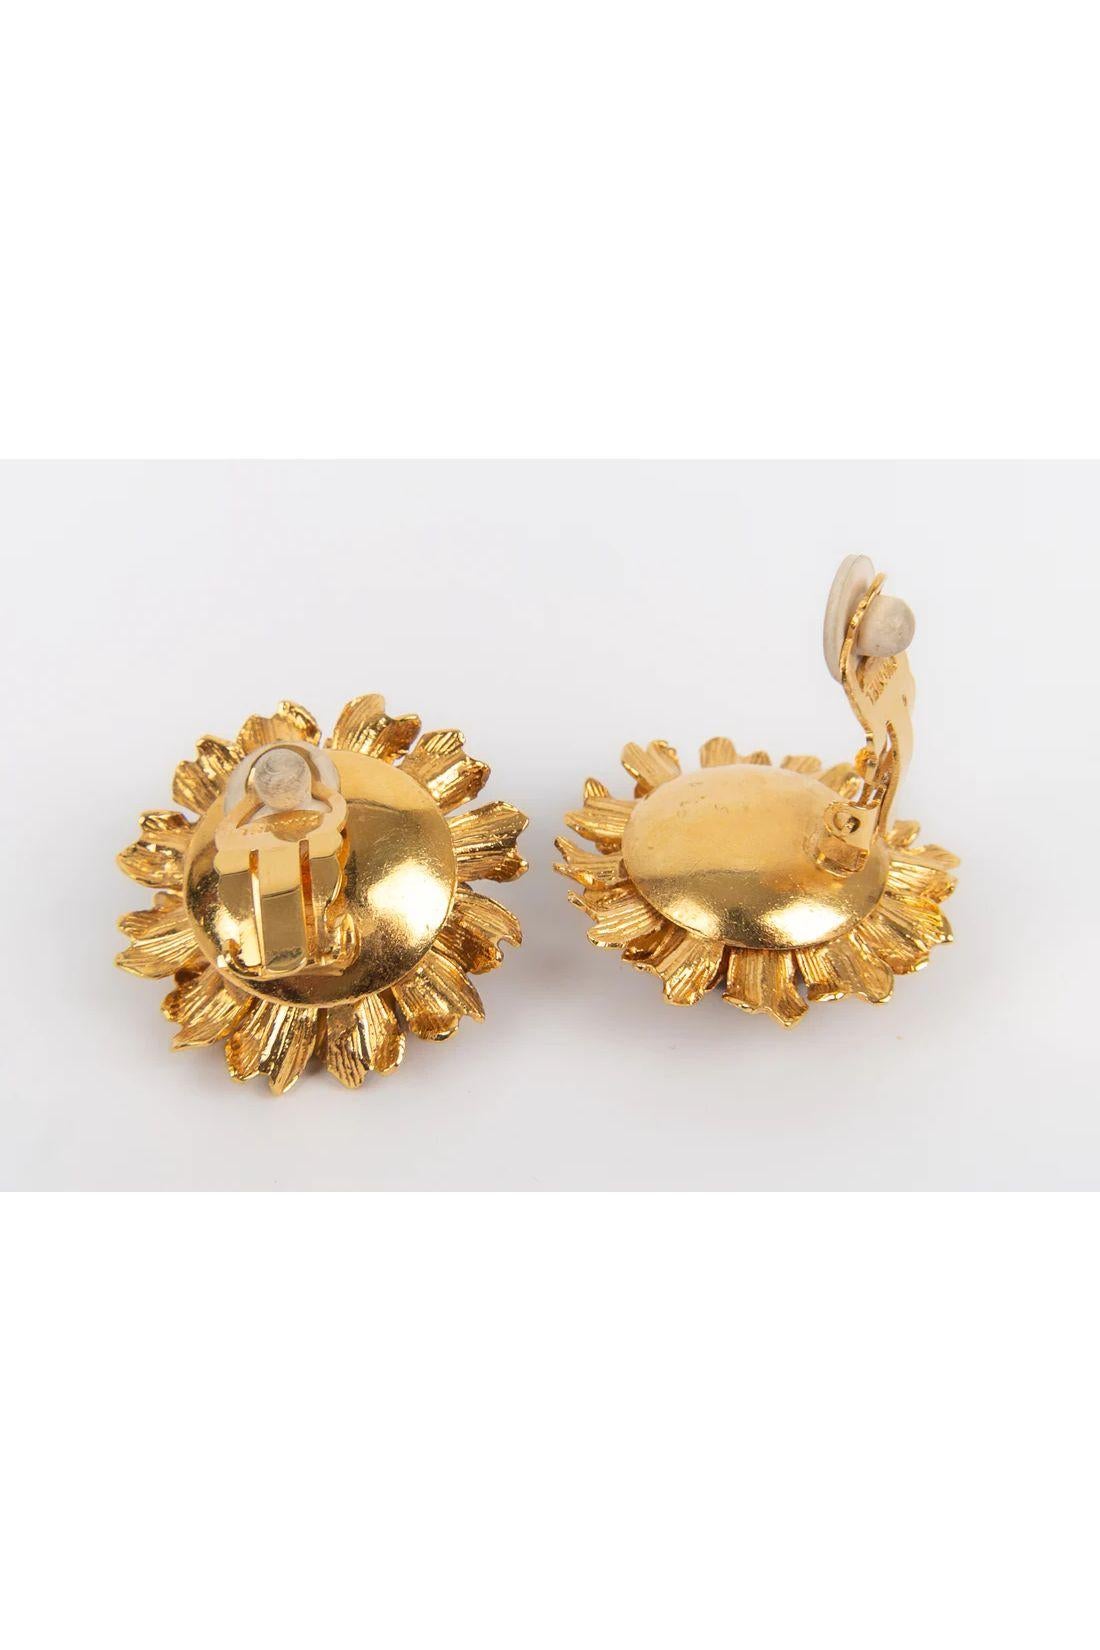 Chanel Gilt Metal and Glass Paste Cabochon Earrings For Sale 1